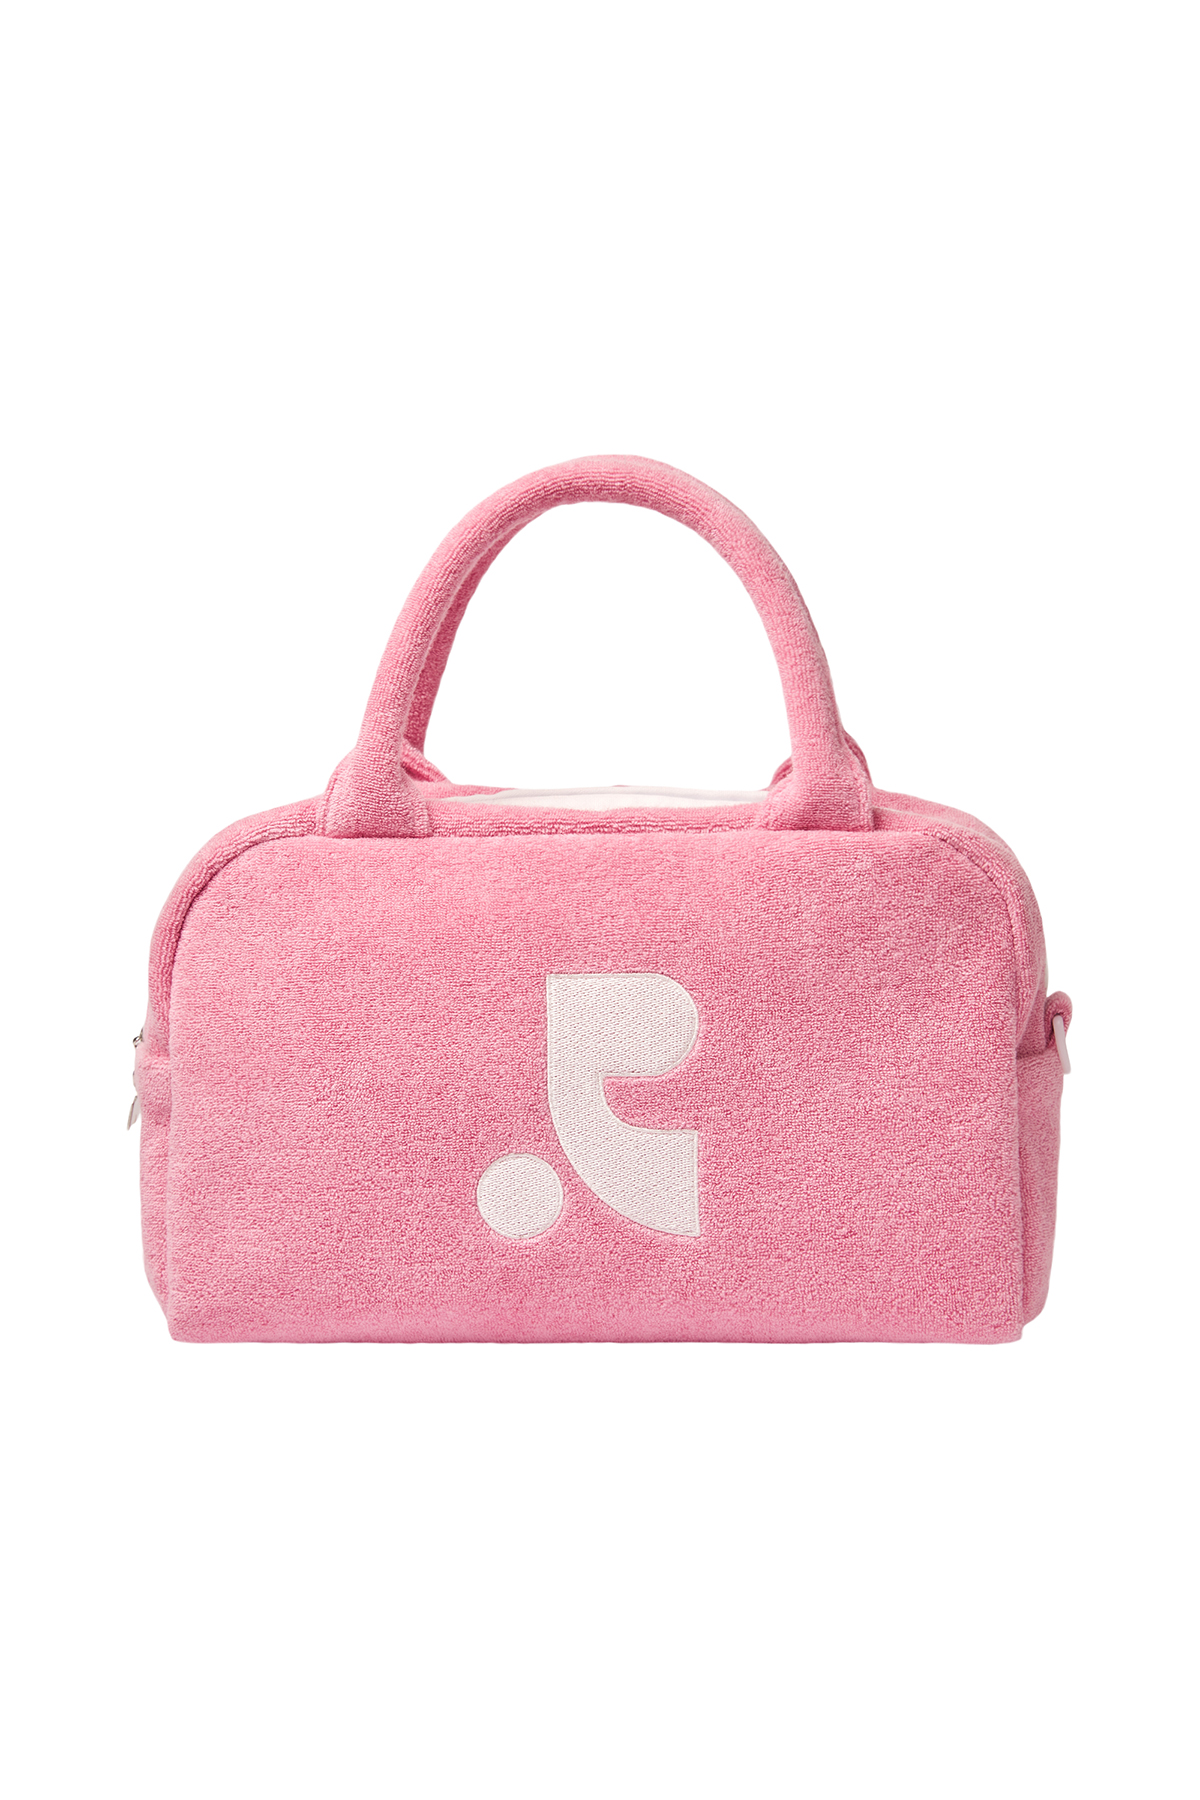 RR LOGO TERRY TOTE BAG - PINK